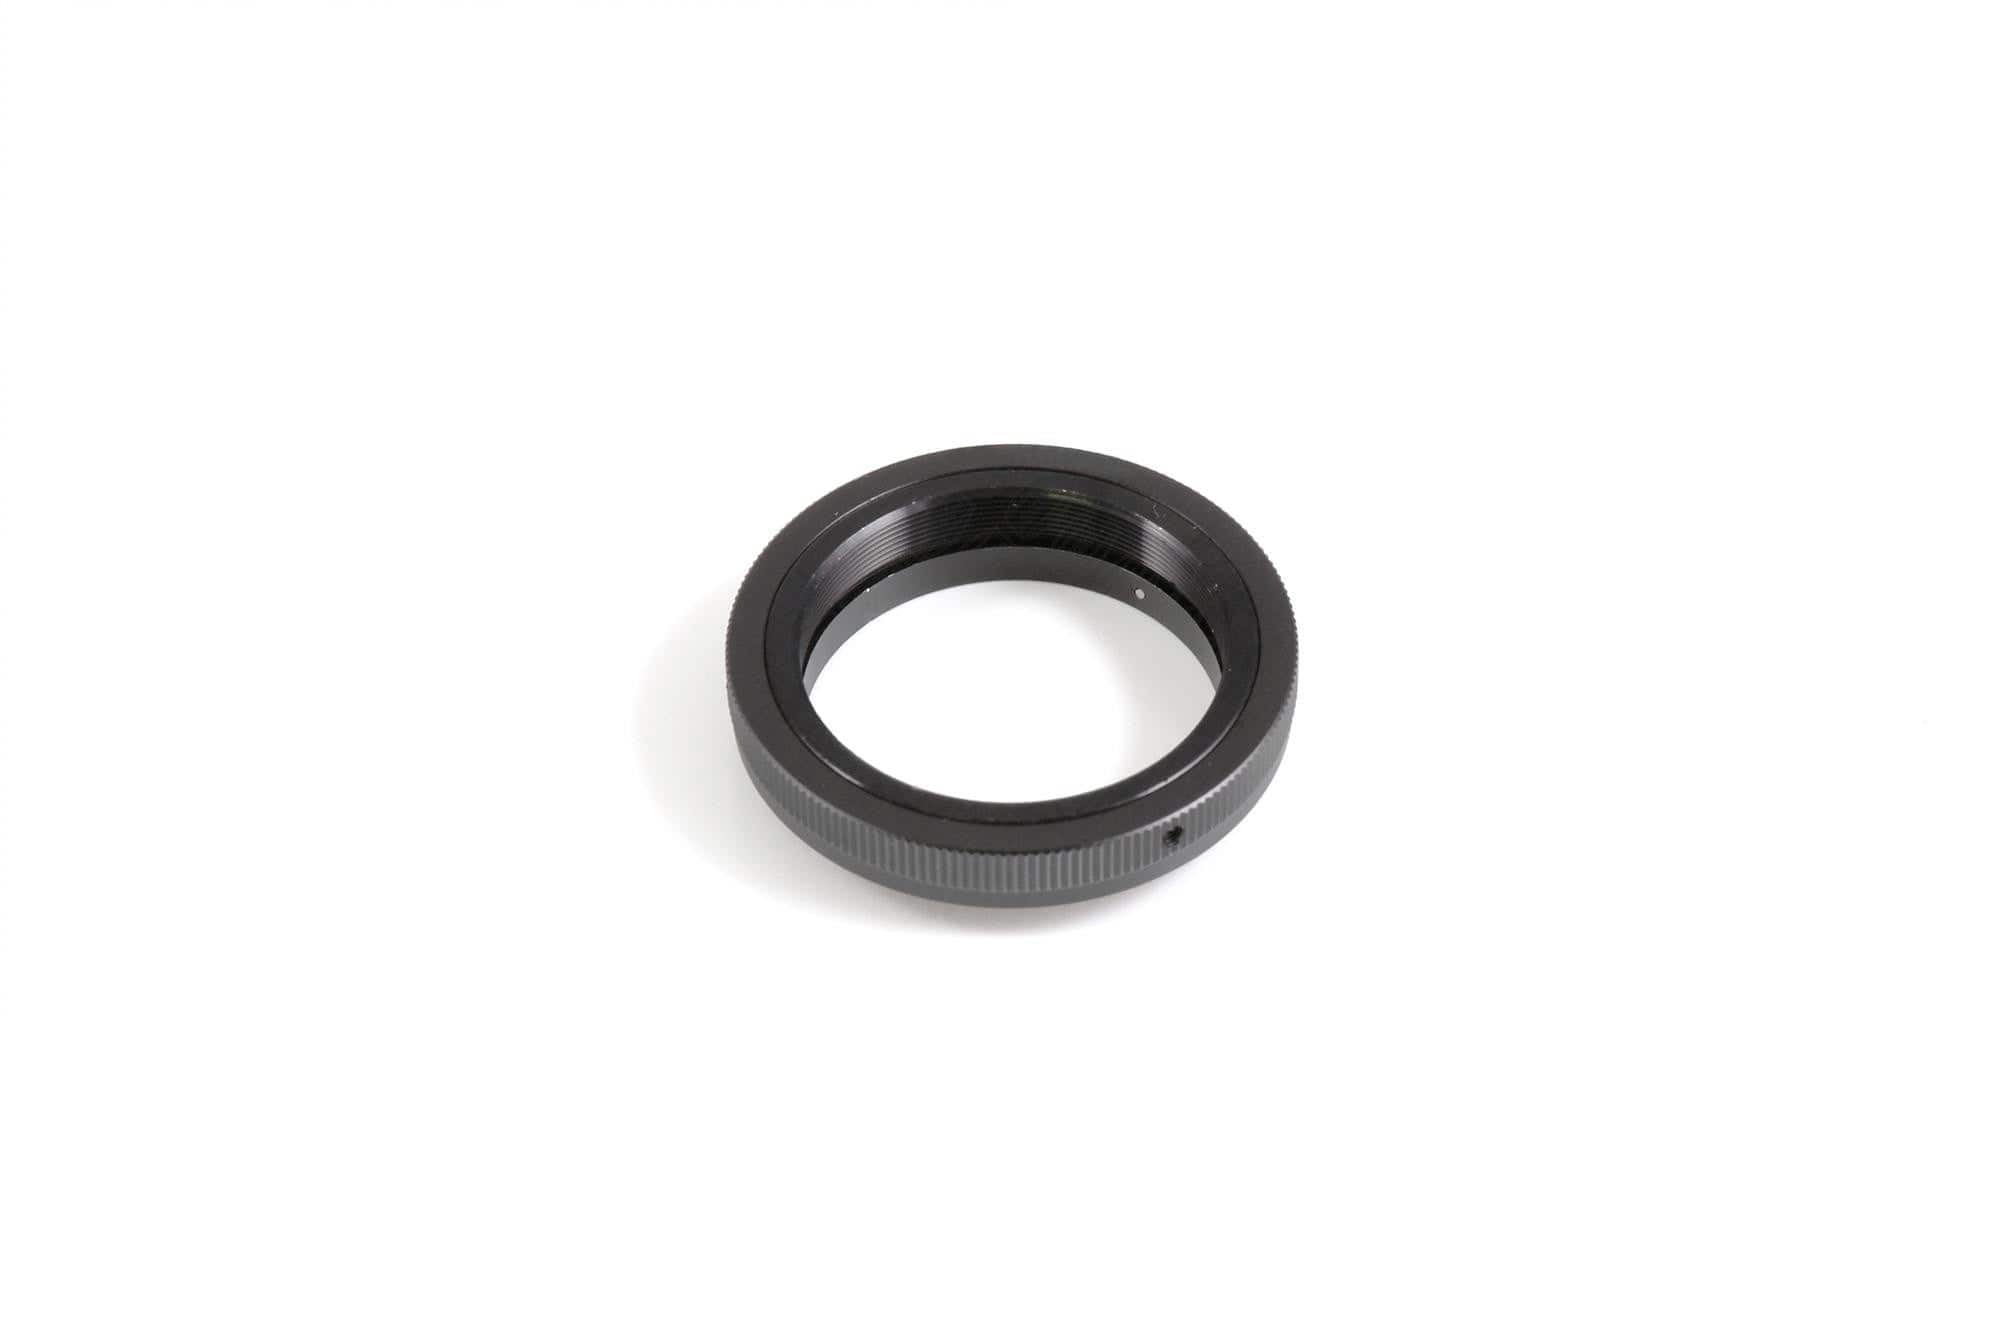 Baader Planetarium Accessory Baader T-Ring to T-2 for Nikon - 2408300